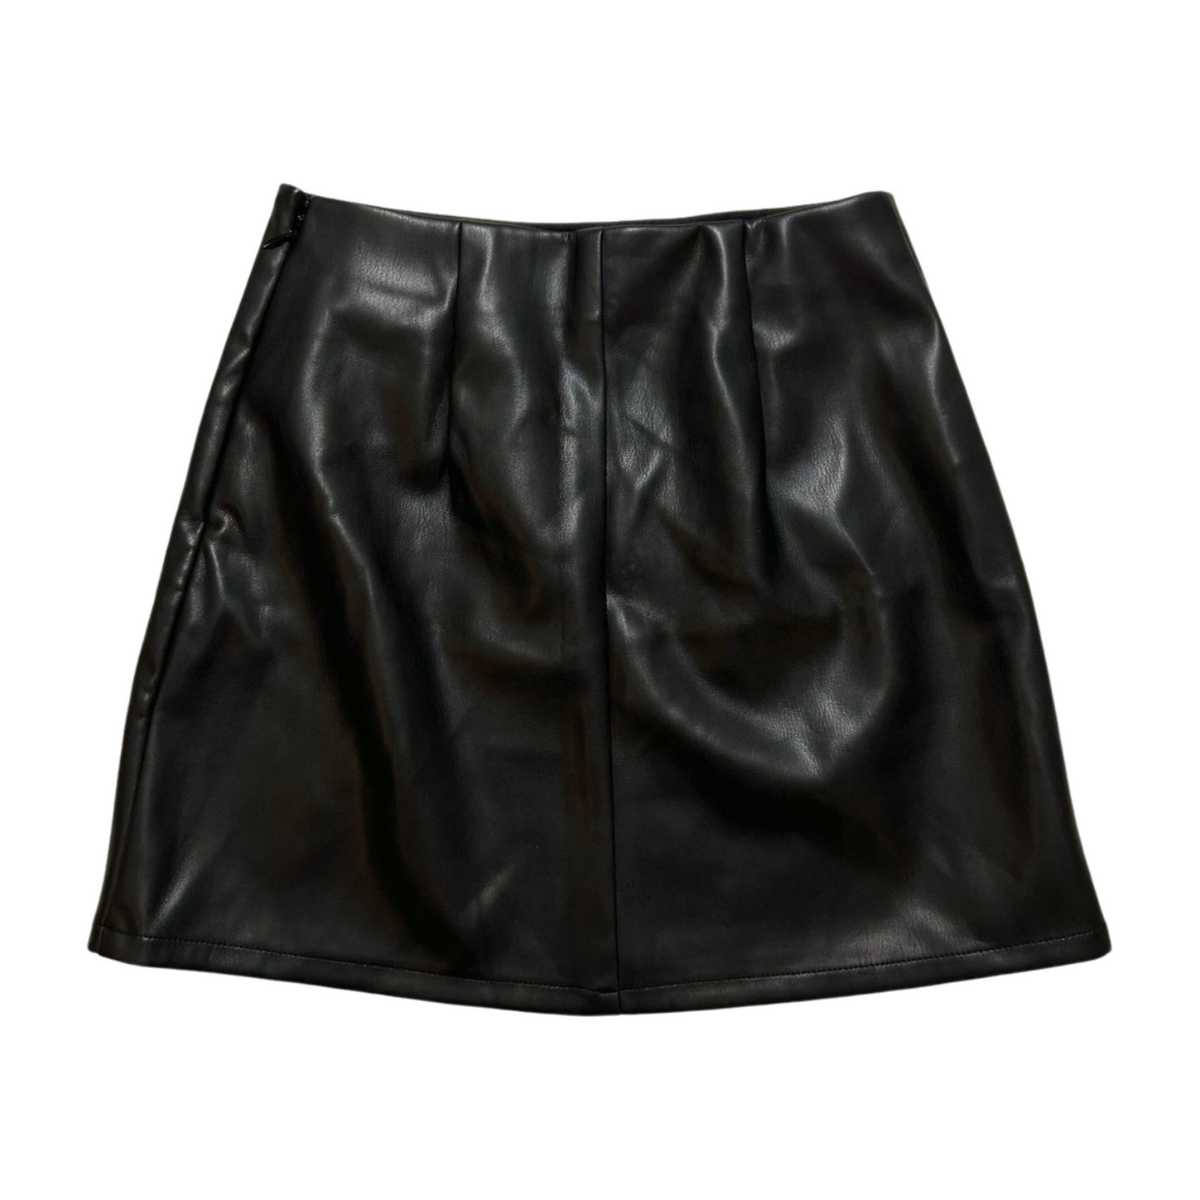 Hollister- Black Leather Mini Skirt NEW WITH TAGS!